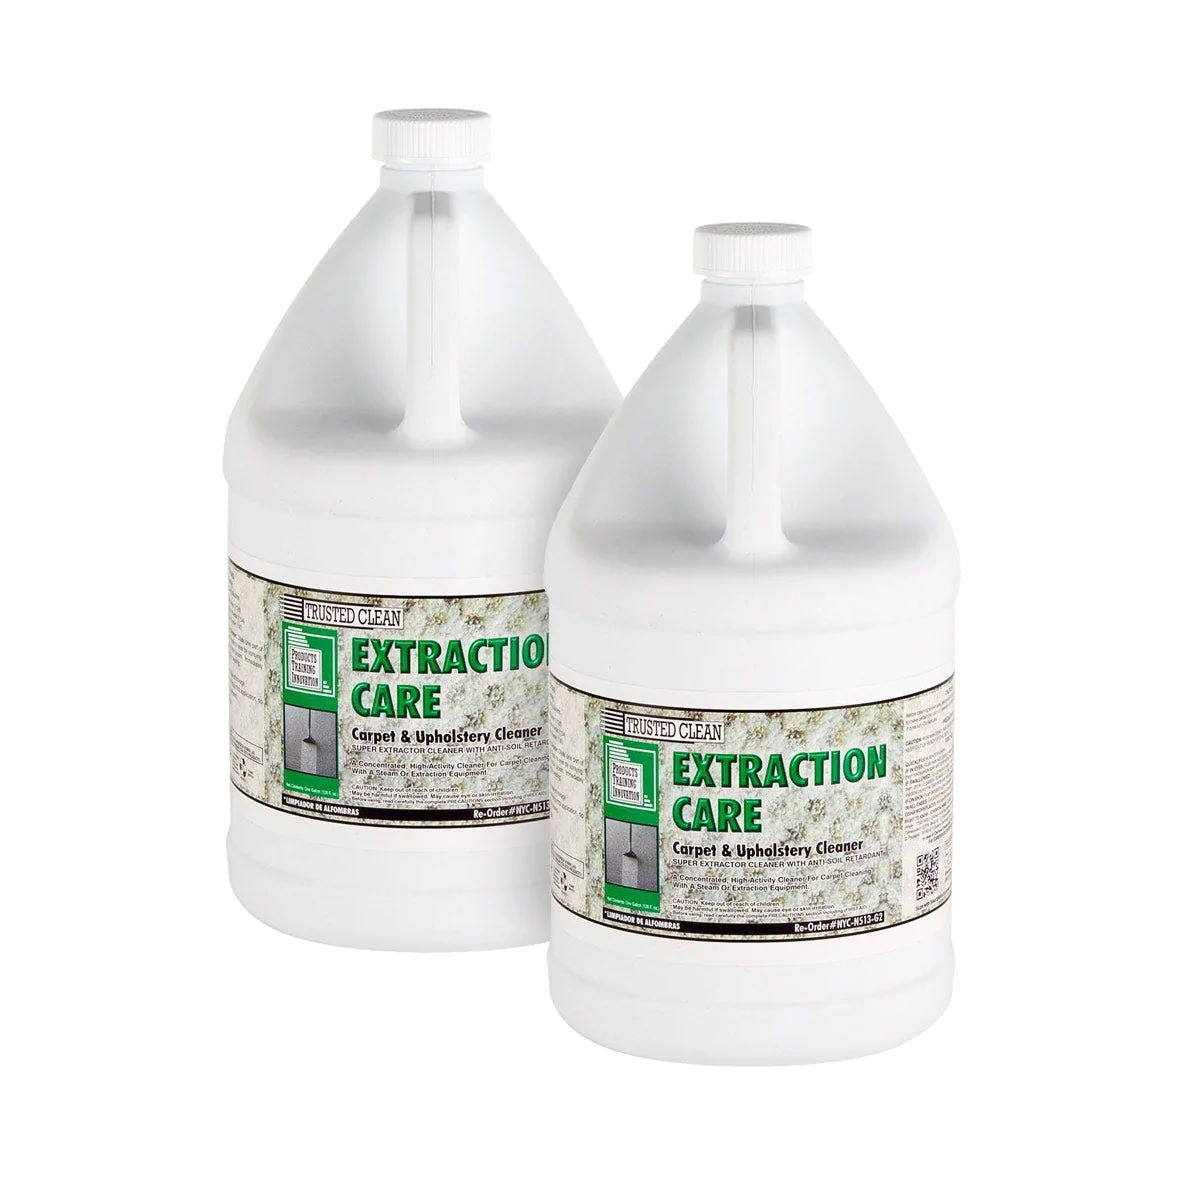 Carpet & Upholstery Cleaner – Wizards Products - All rights reserved. Any  duplication is prohibited.